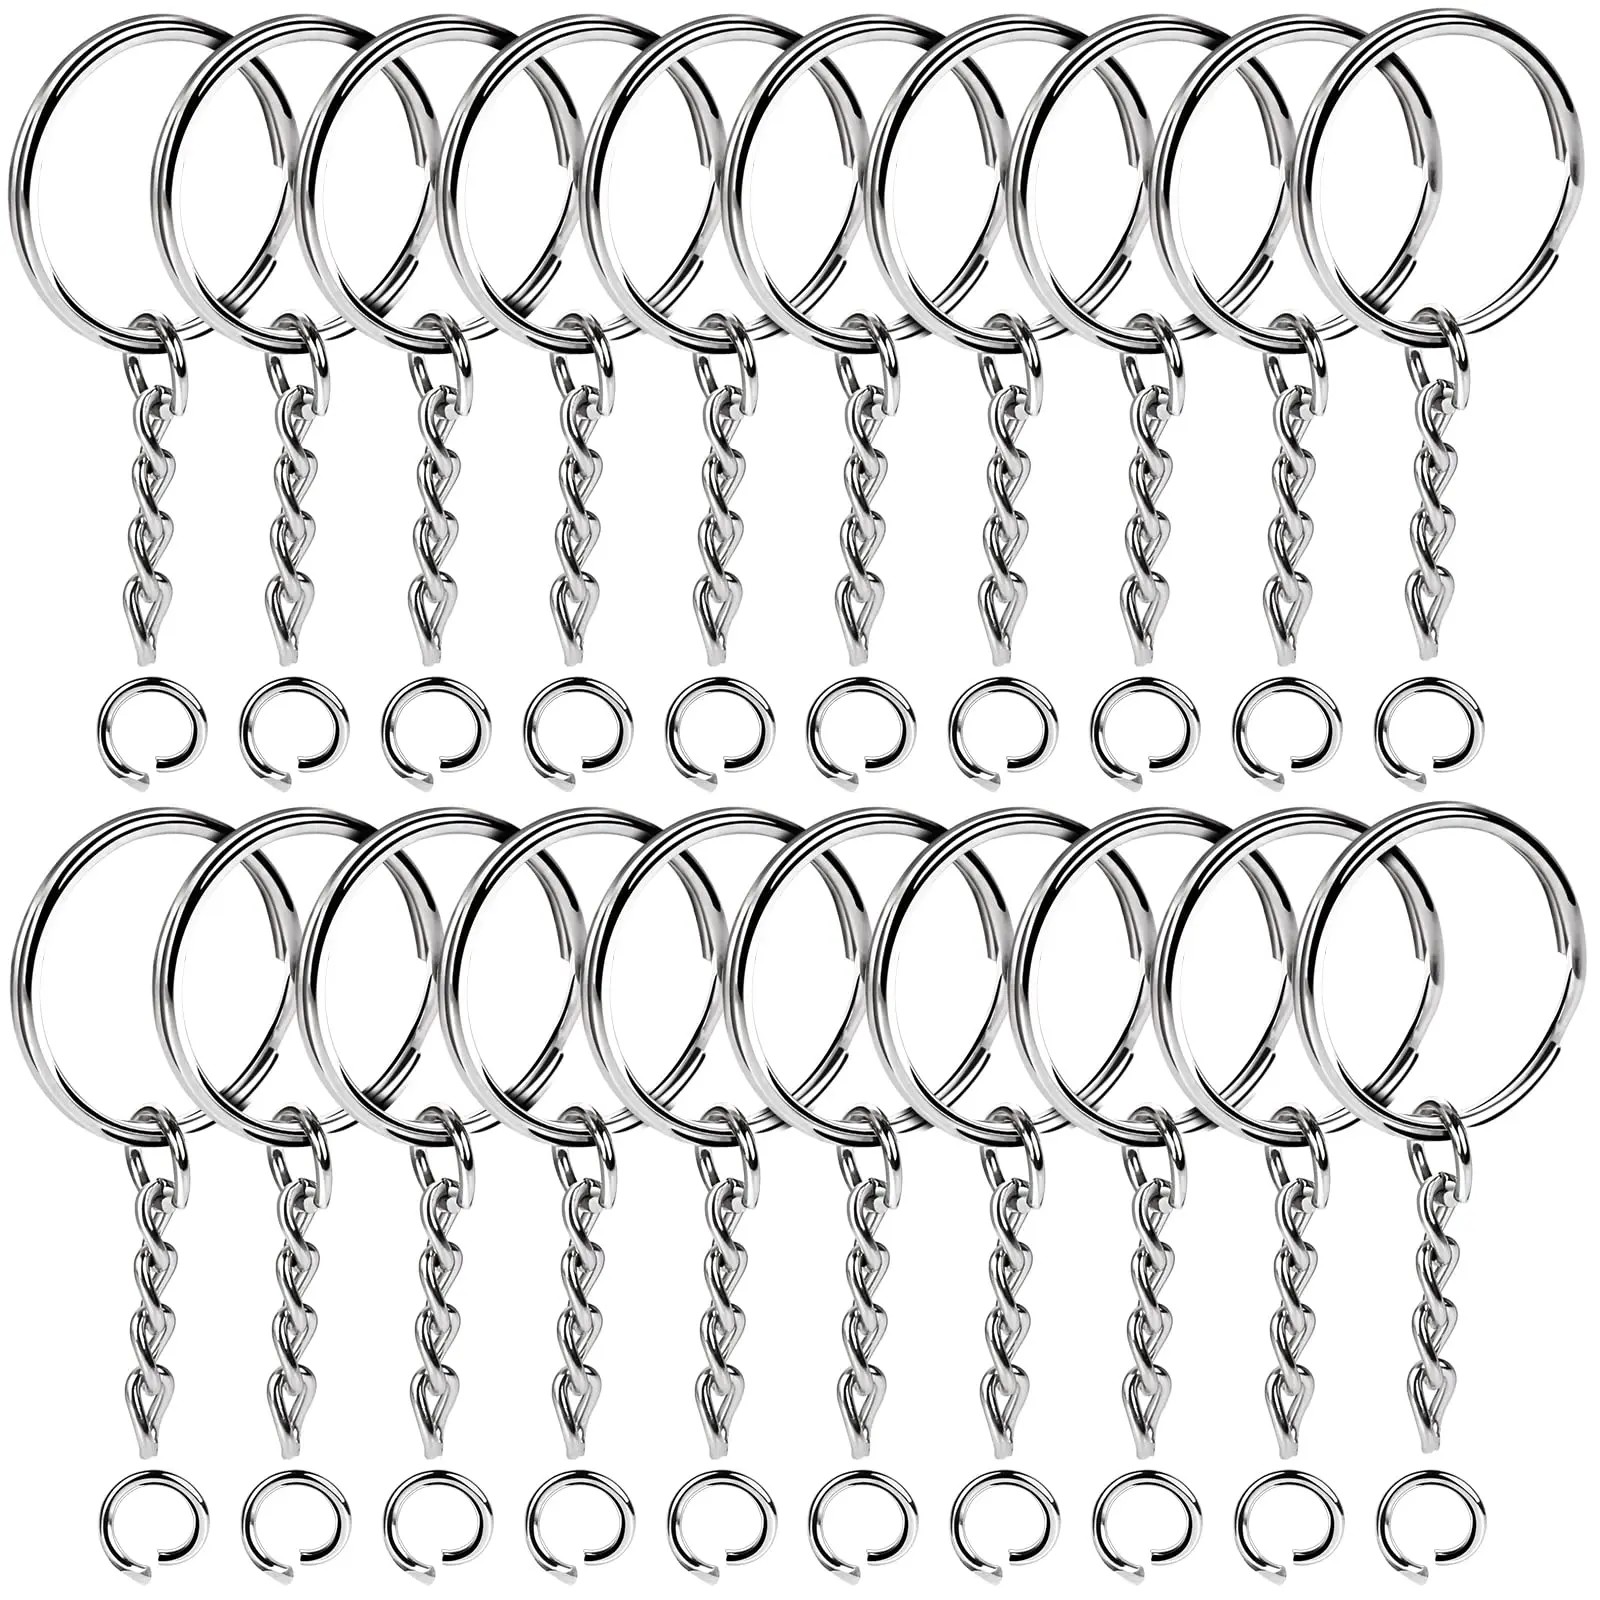 10pcs Metal Split Keychain Ring Parts Key Chains With 25mm Open